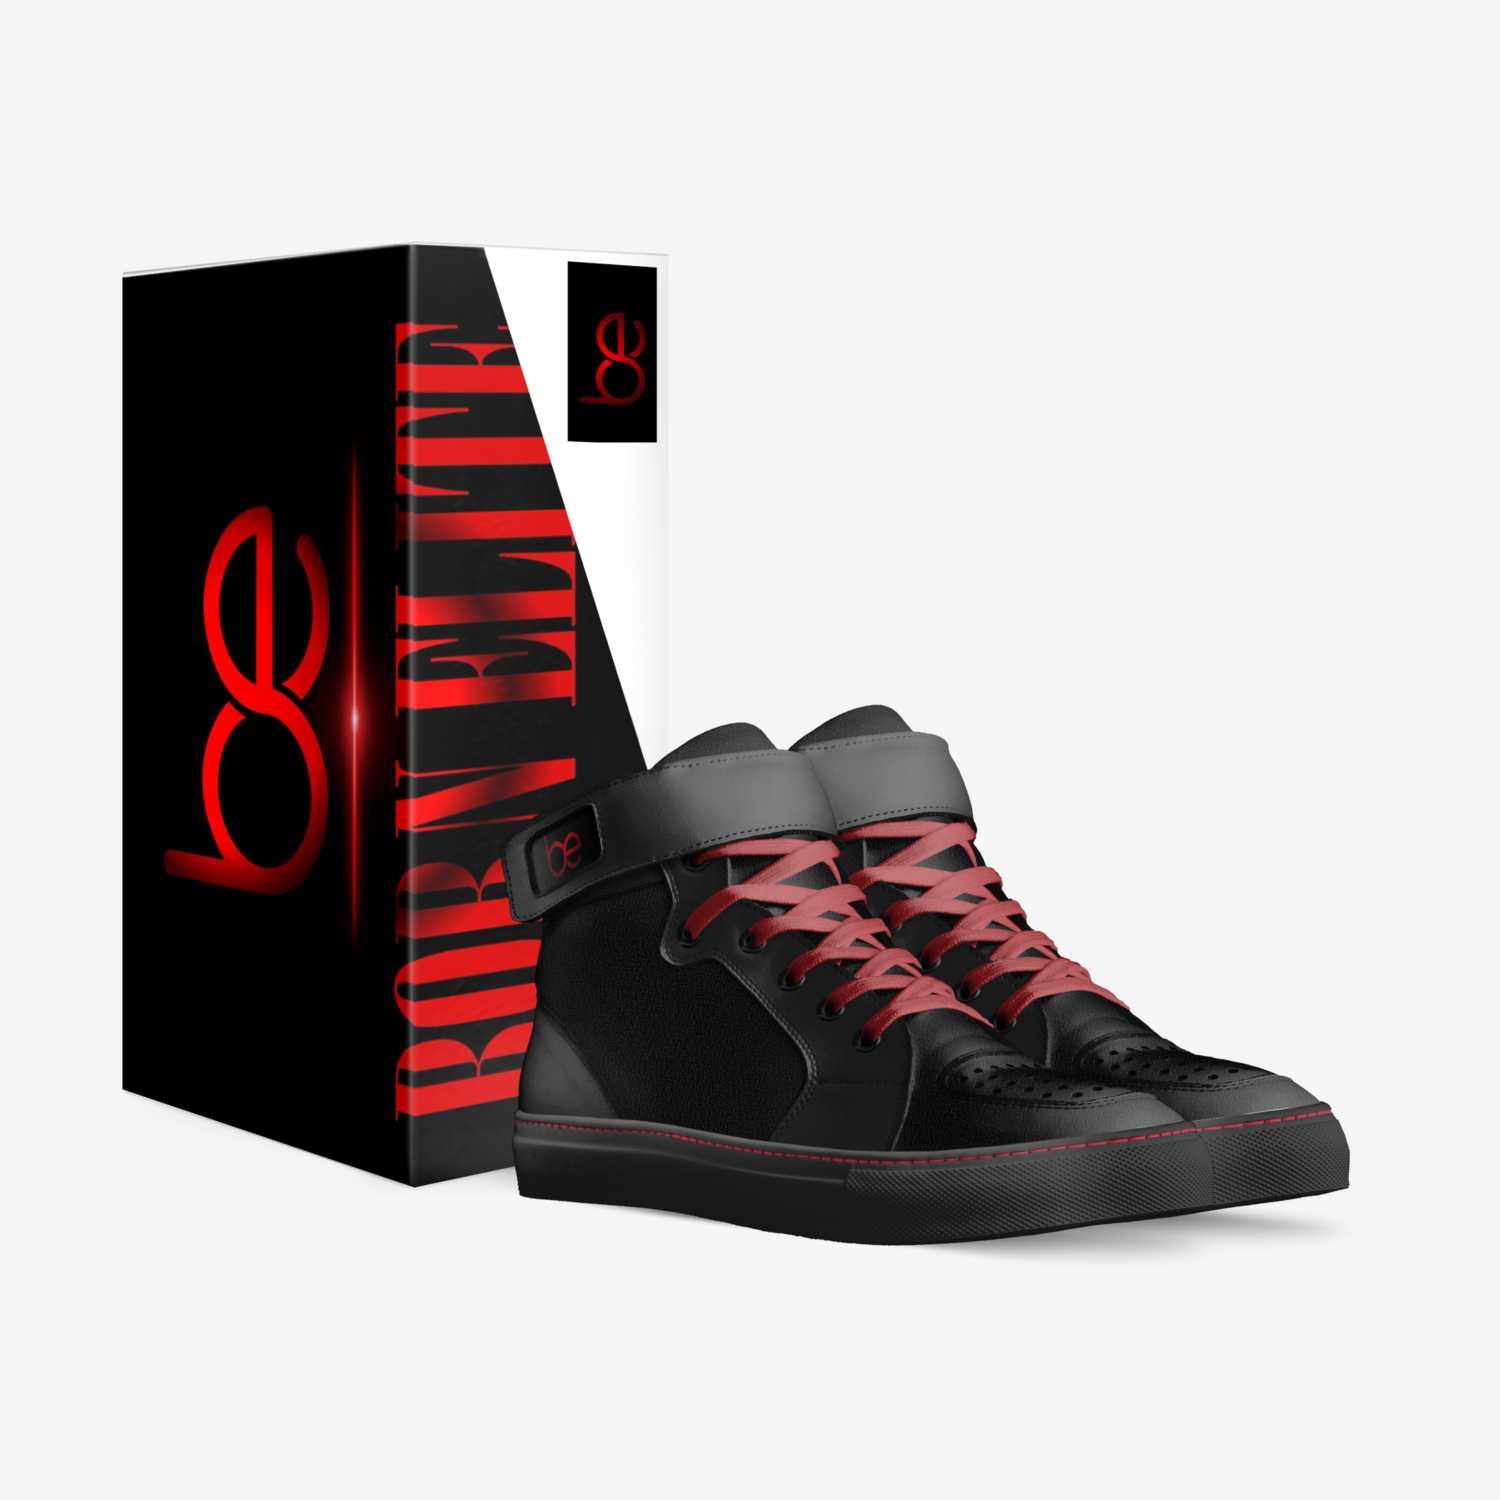 BORN ELITE custom made in Italy shoes by Adrian Martin | Box view